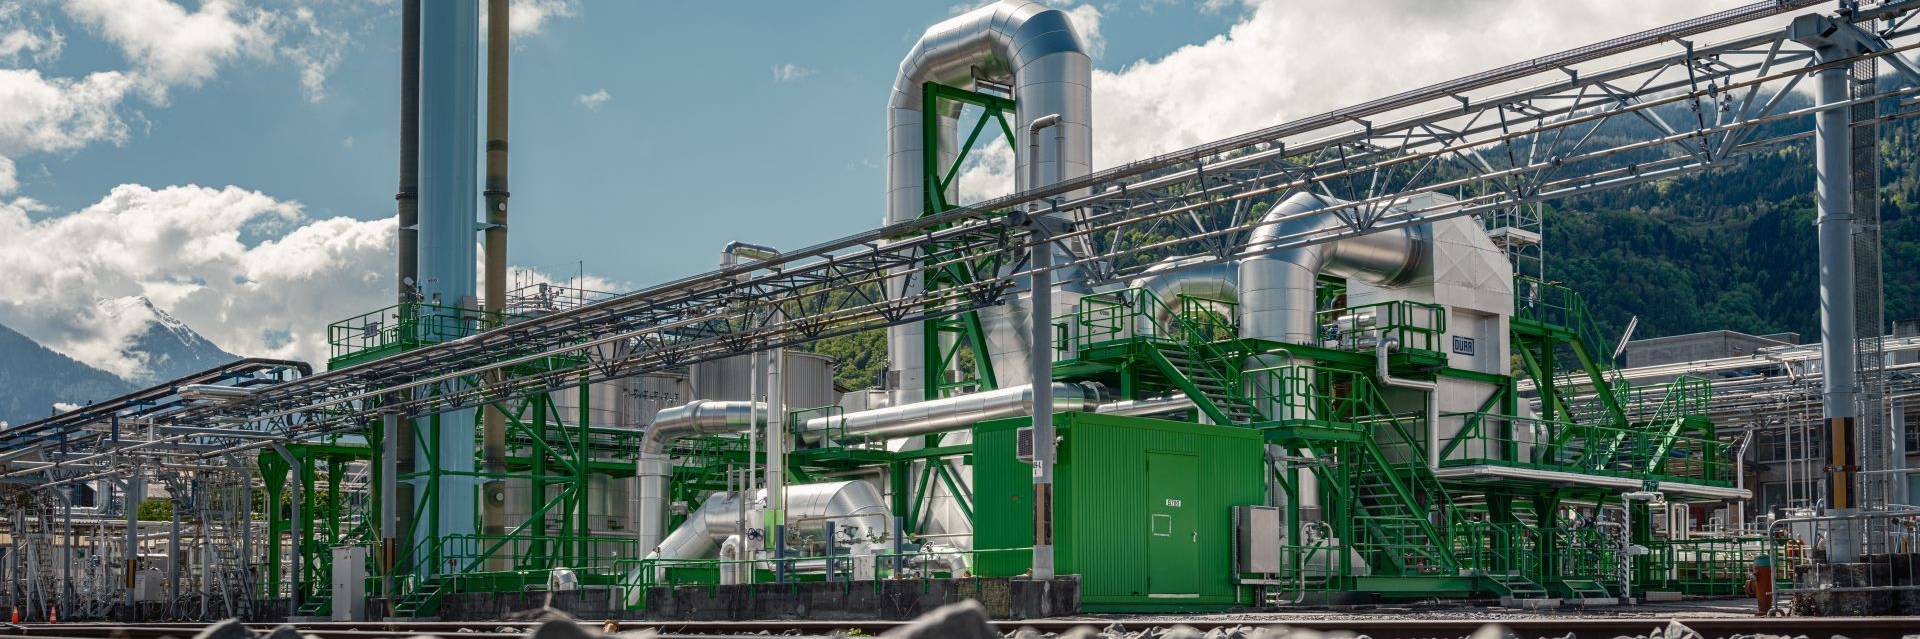 Exhaust-air purification plant 